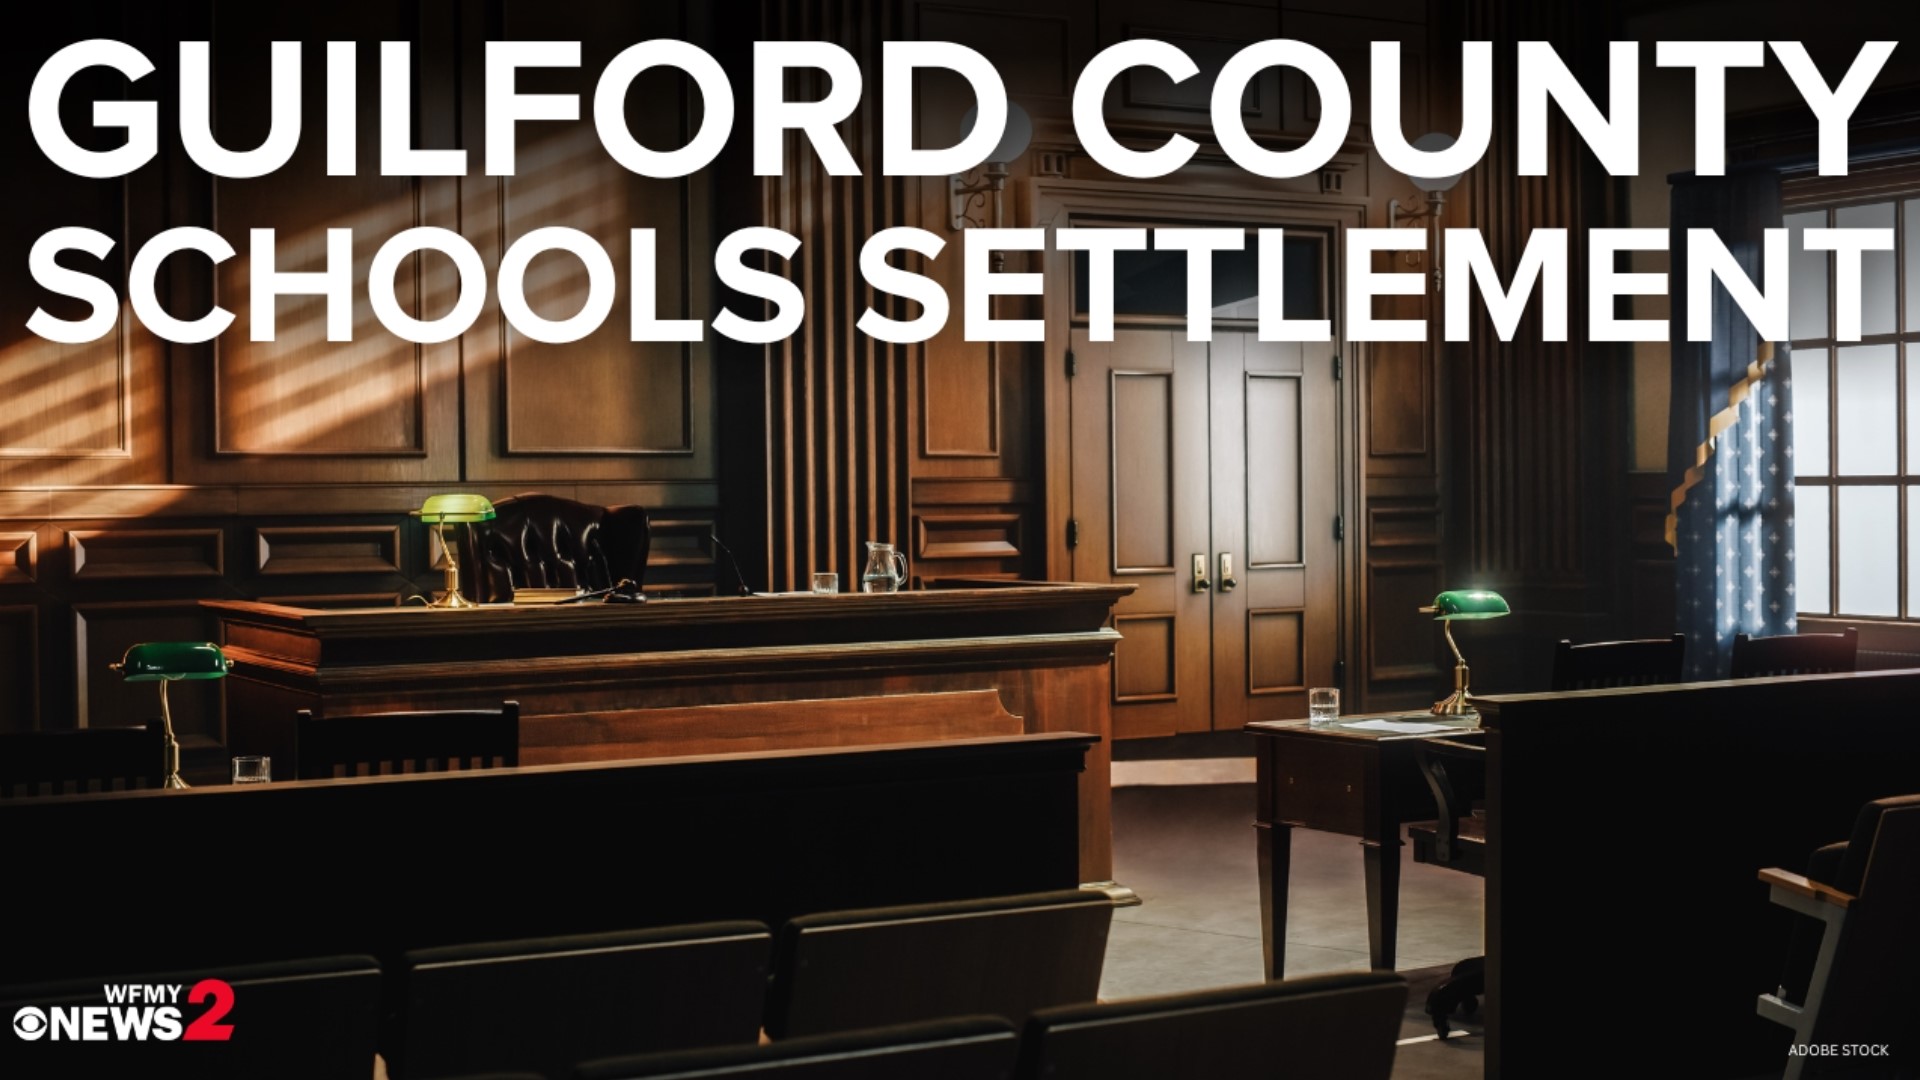 Guilford County Schools paid the female student $90,000 and plans to have yearly Title IX training as part of the settlement.